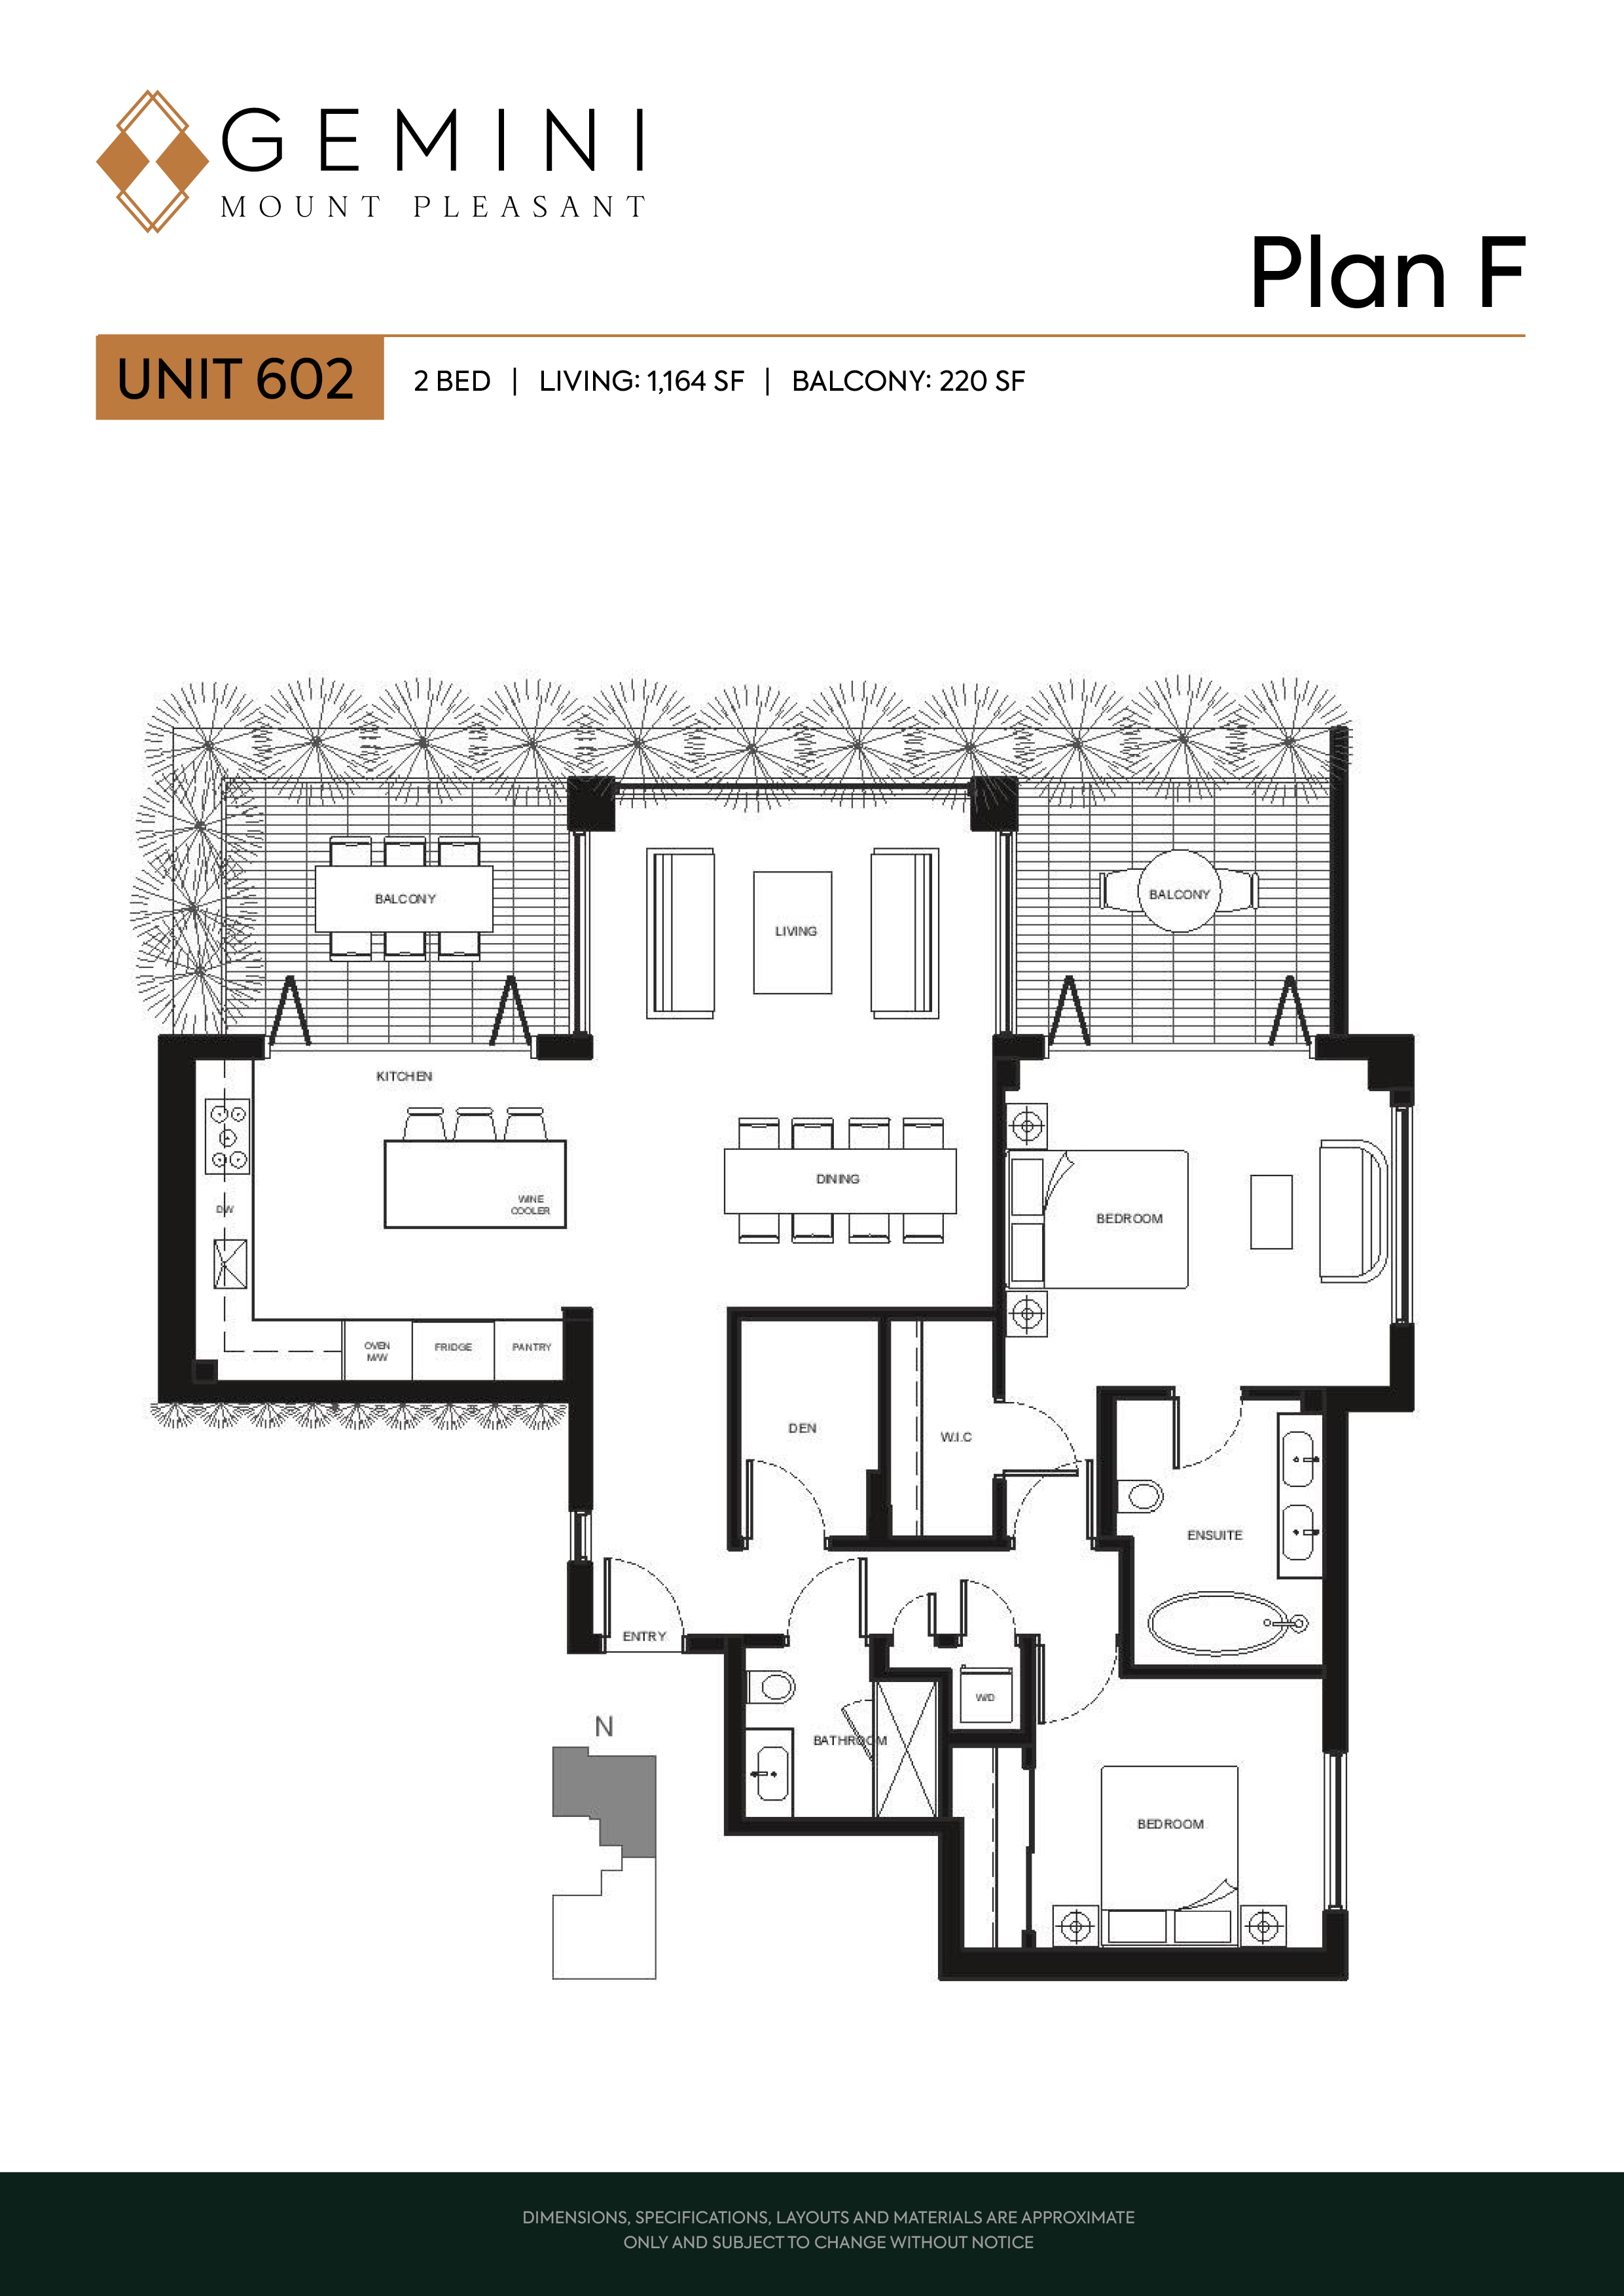 Plan F Floor Plan of Gemini Mount Pleasant Condos with undefined beds